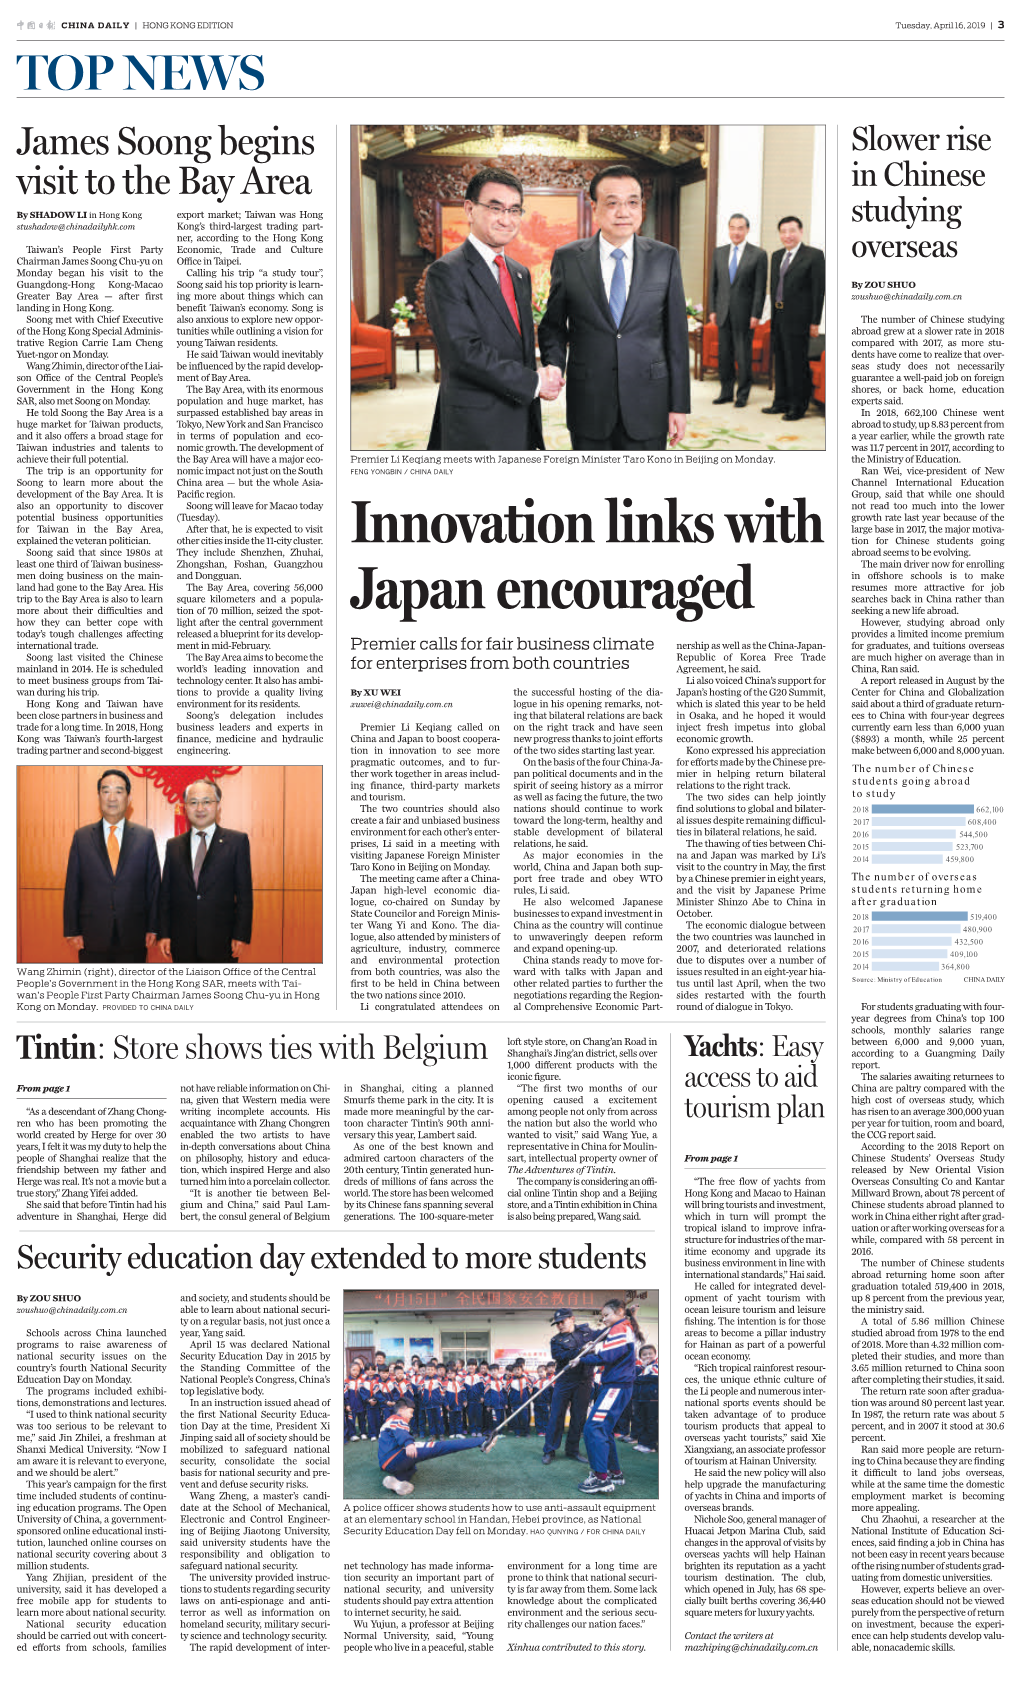 Innovation Links with Japan Encouraged